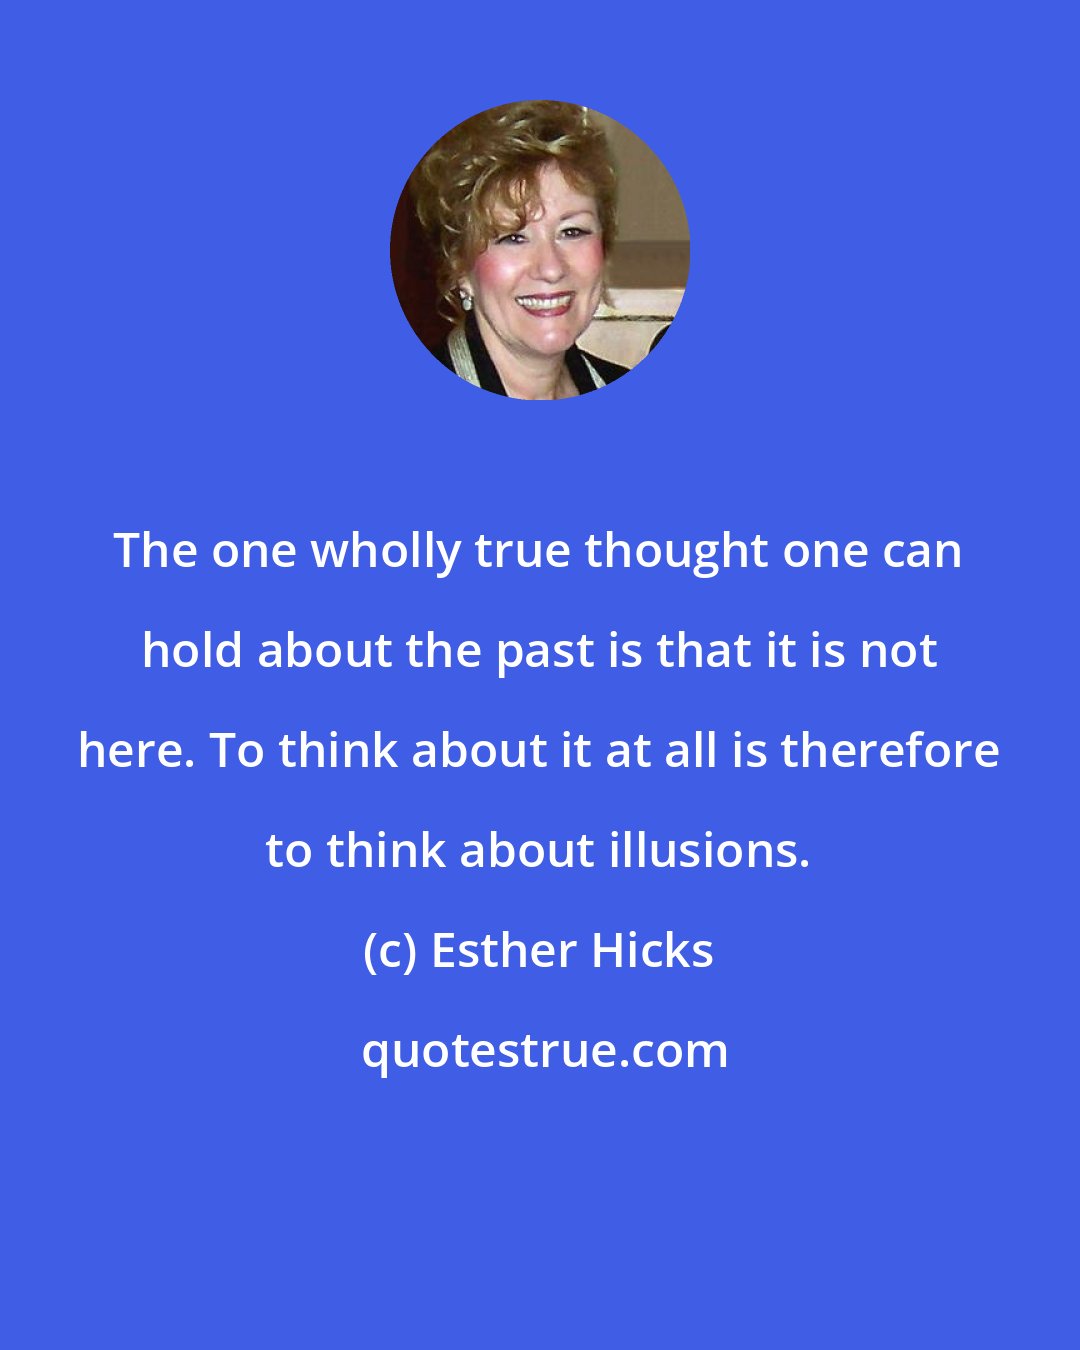 Esther Hicks: The one wholly true thought one can hold about the past is that it is not here. To think about it at all is therefore to think about illusions.